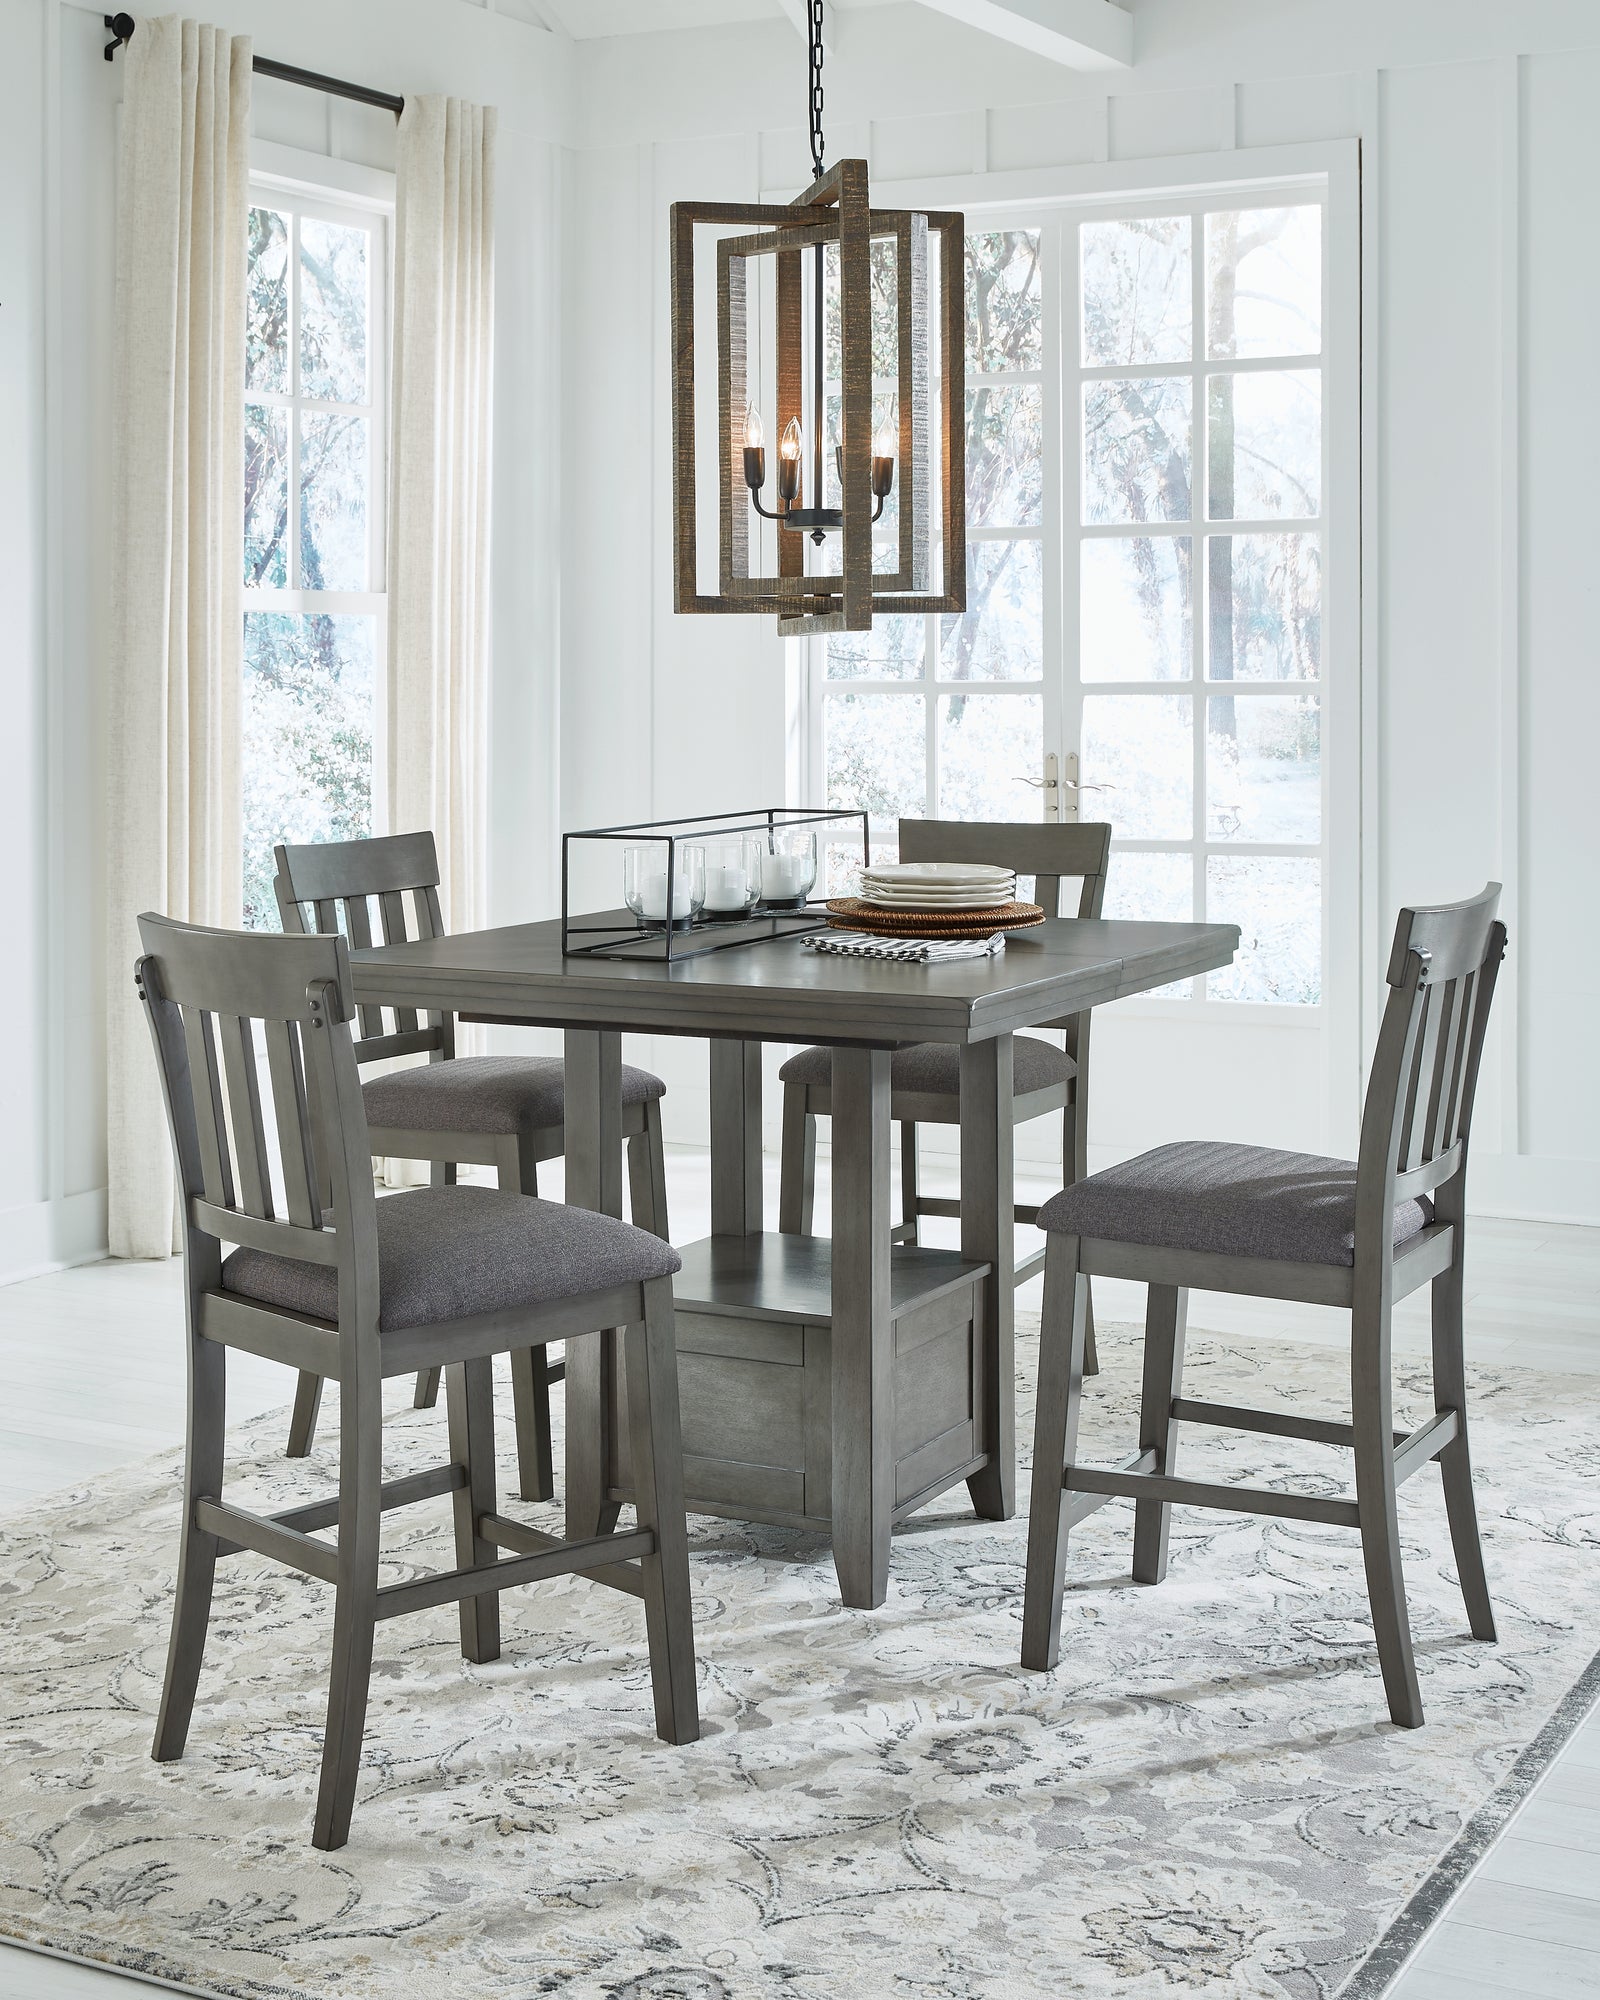 Hallanden Gray Counter Height Dining Table And 4 Barstools